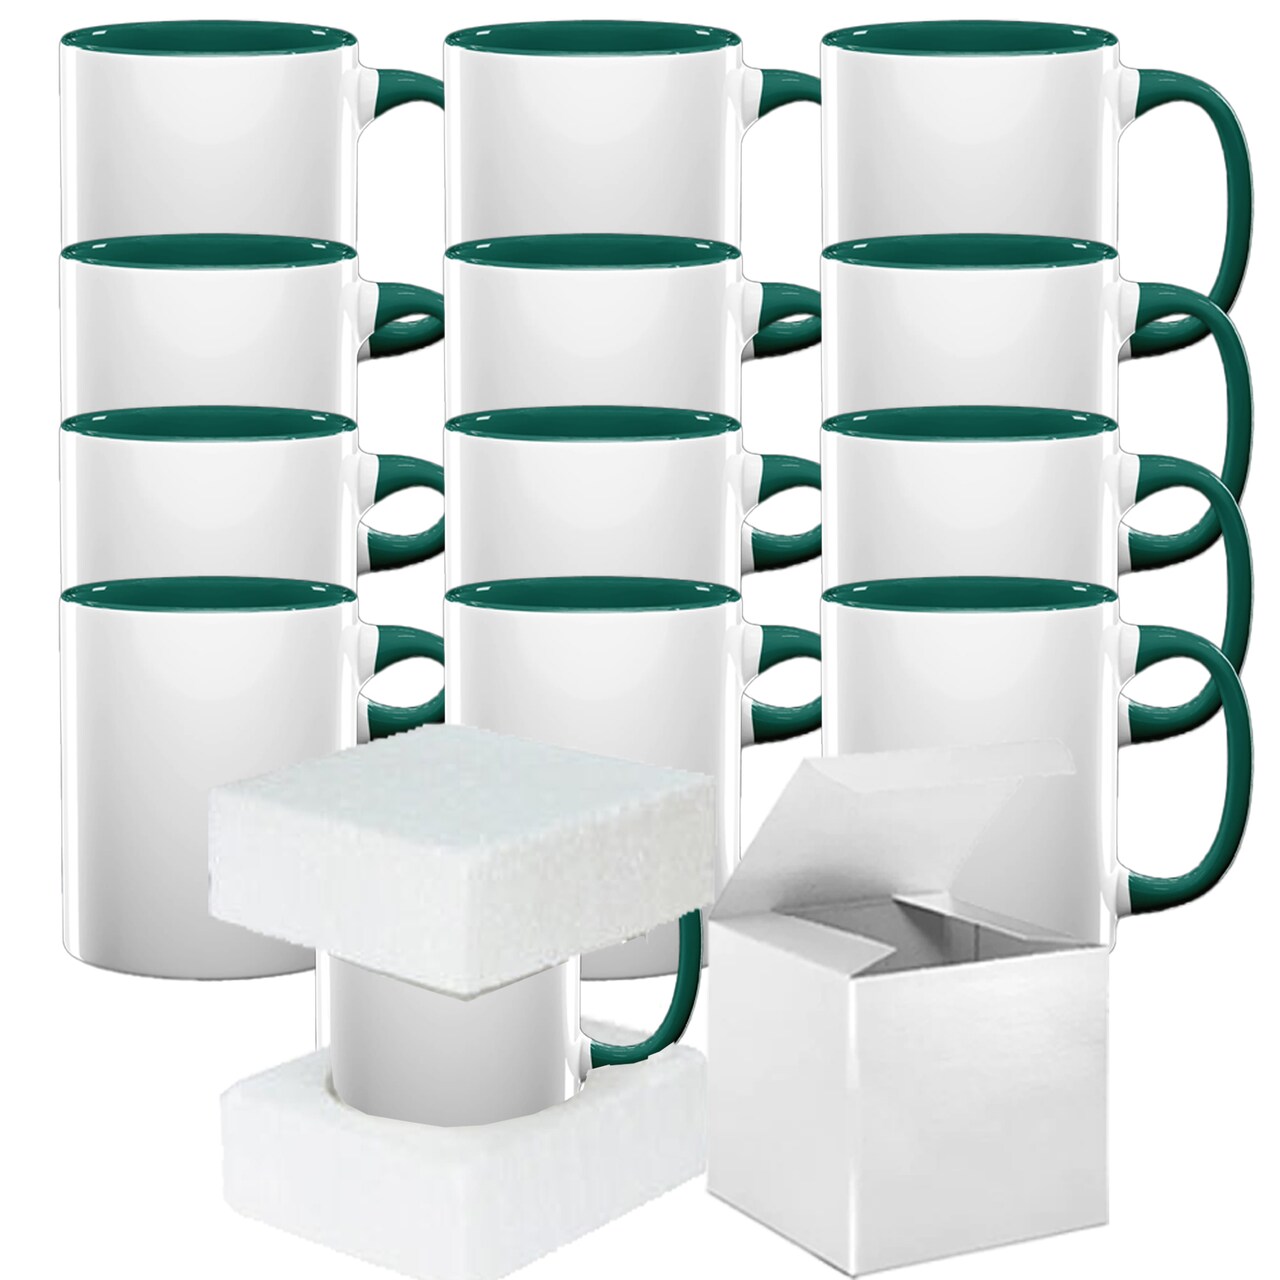 12-Pack Hunter Green Sublimation Mugs- 15oz, Hunter Green Interior And  Handle, Includes Foam Support Mug Shipping Boxes